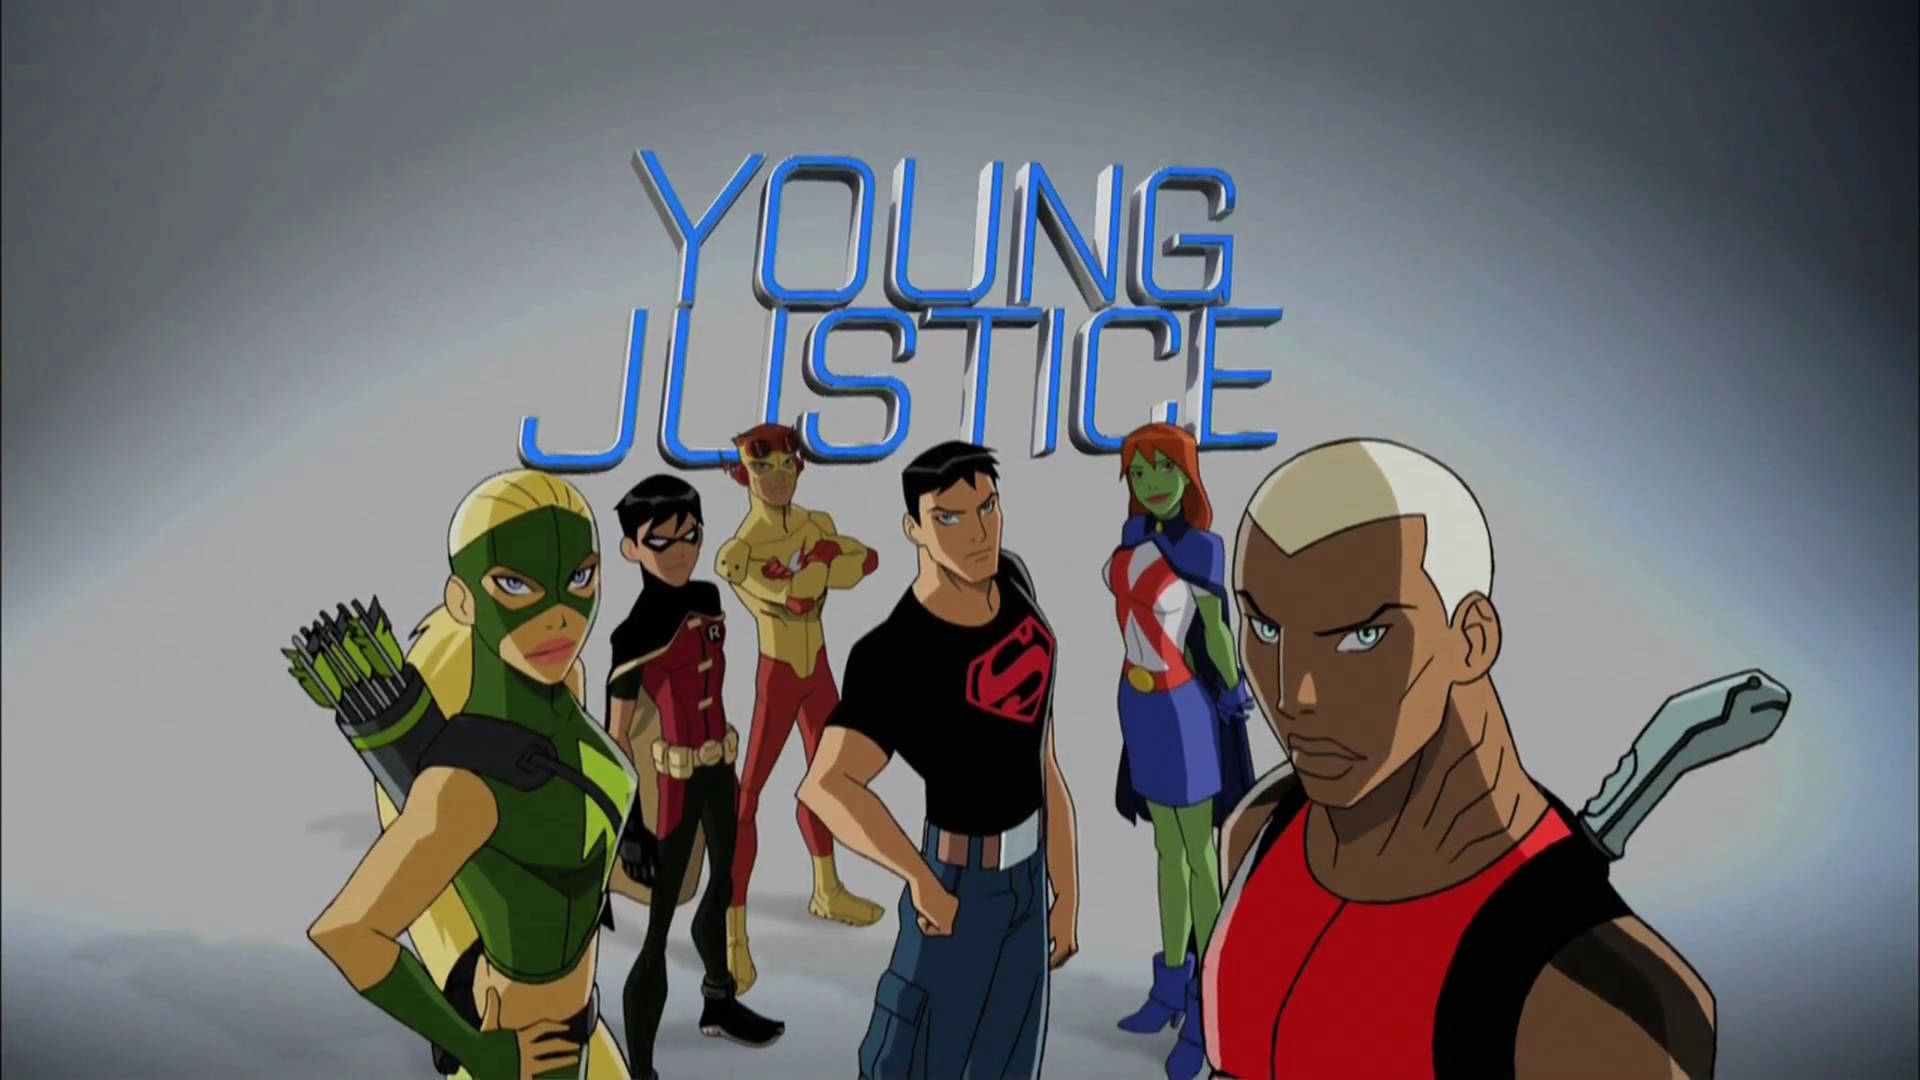 The Powerful Team of Young Justice Strikes a Pose Wallpaper